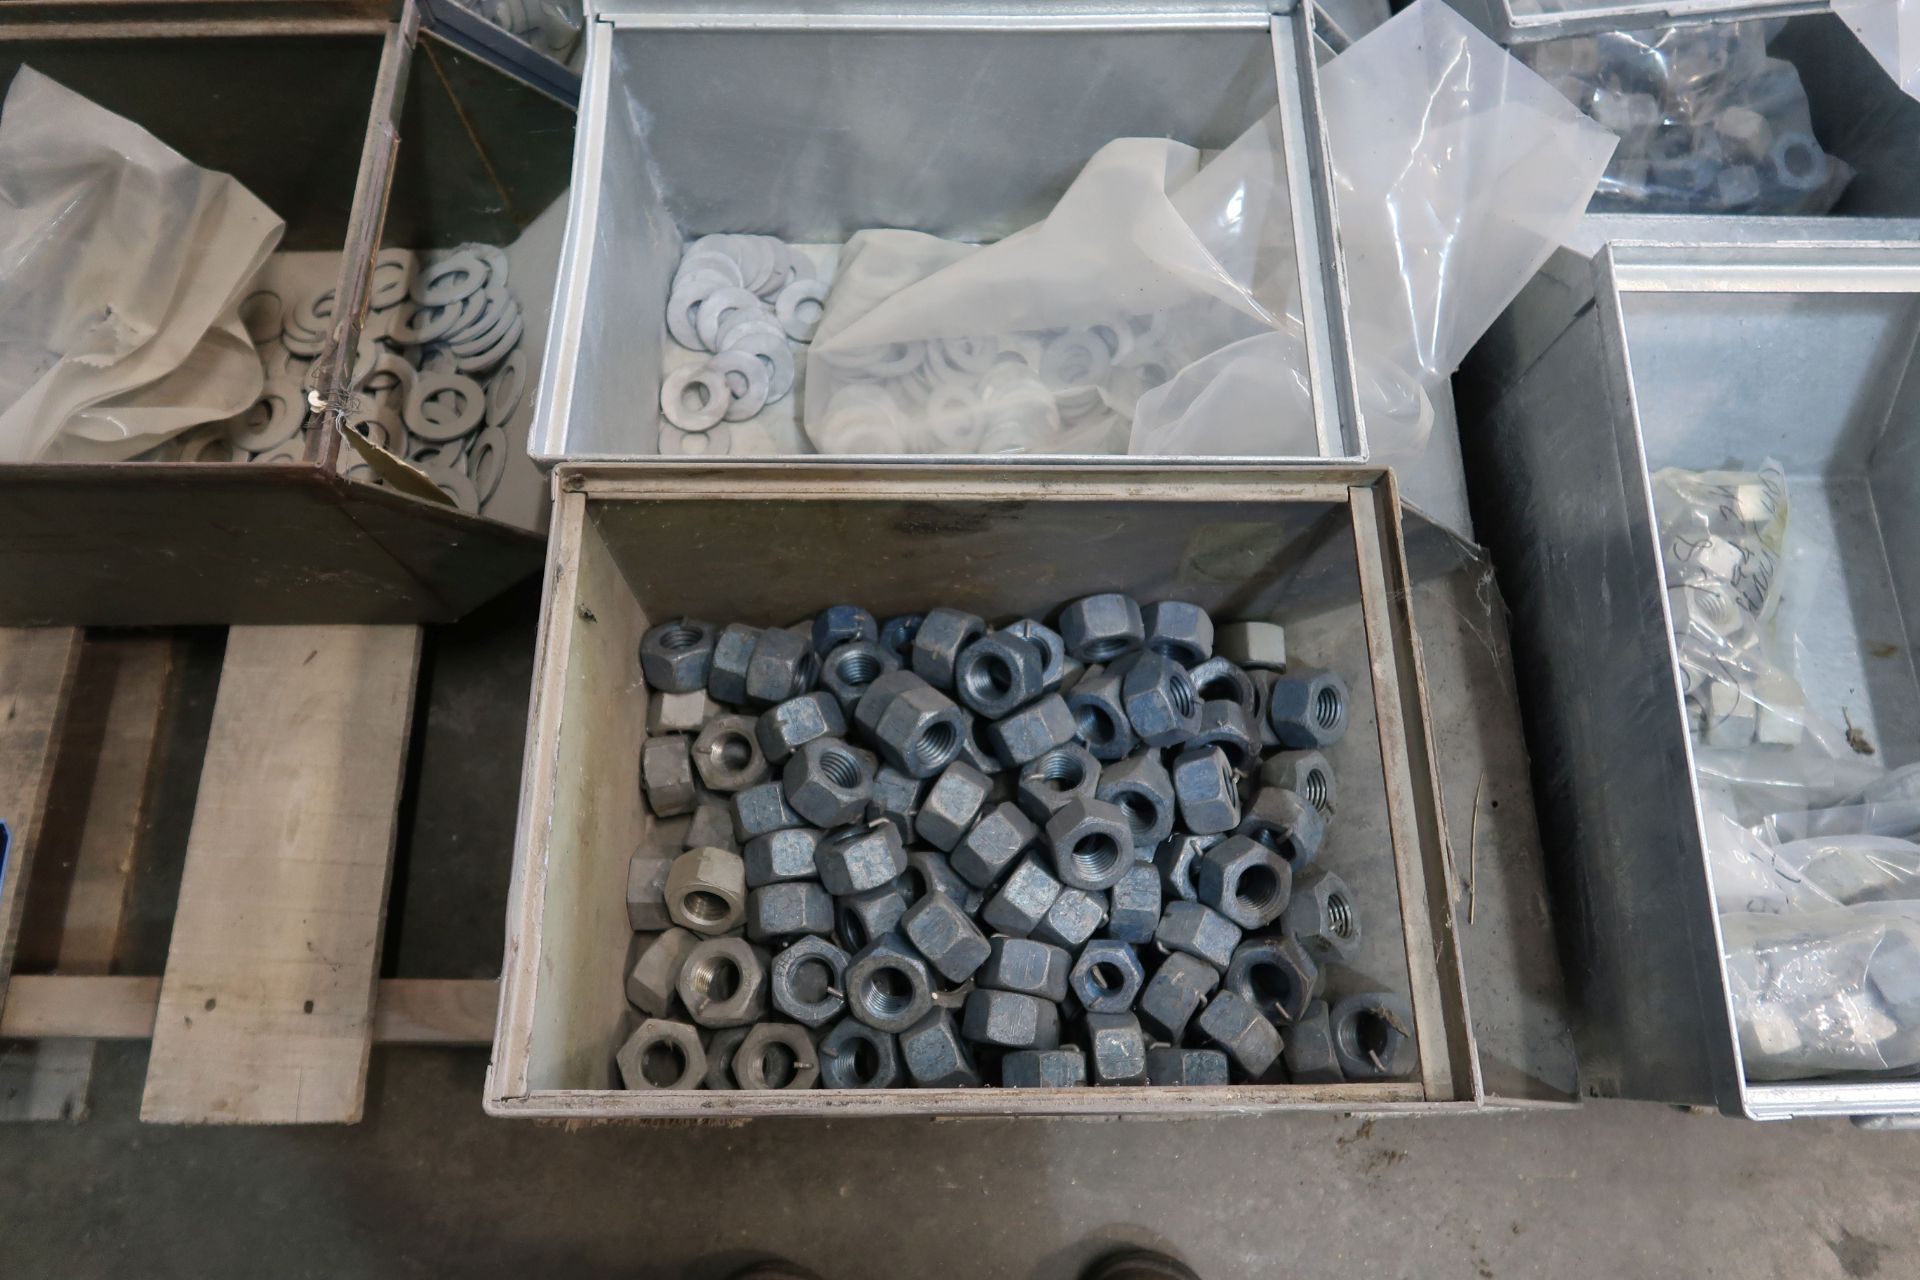 SKID MISCELLANEOUS GALVANIZED TOWER COMPONENTS AND HARDWARE - Image 2 of 4